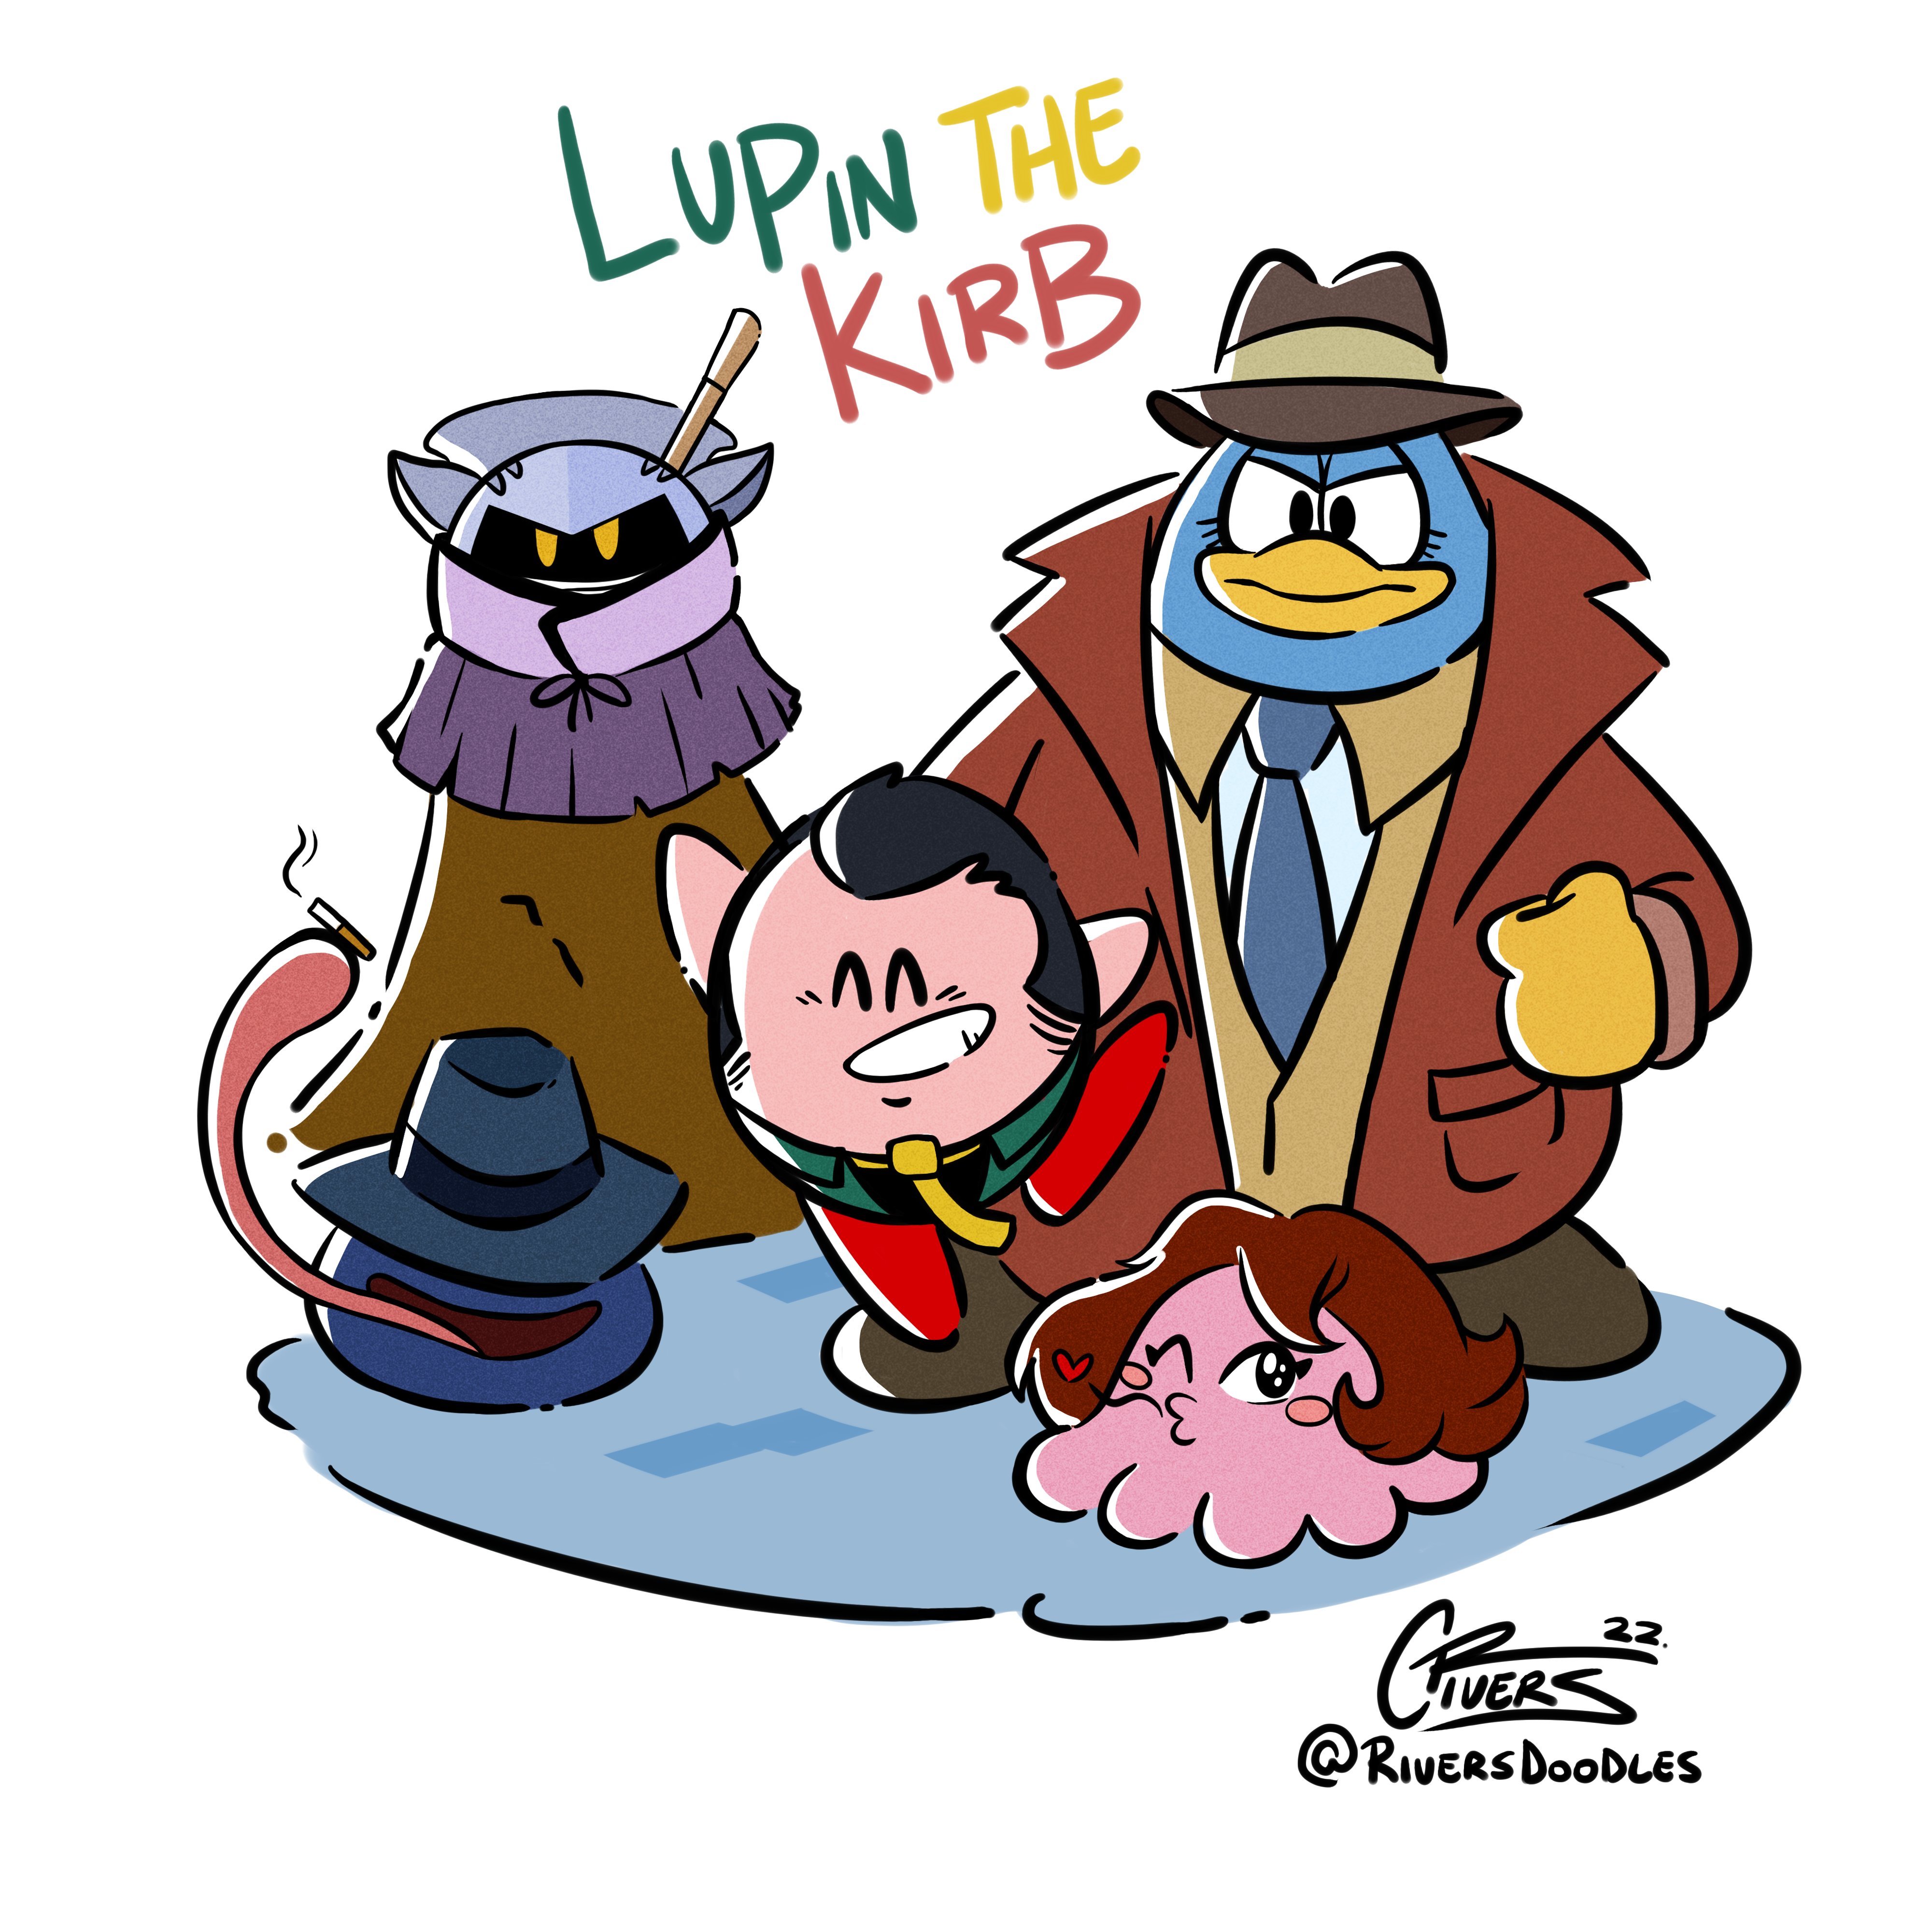 Lupin The III x LoL crossover fanart made by me! : r/leagueoflegends